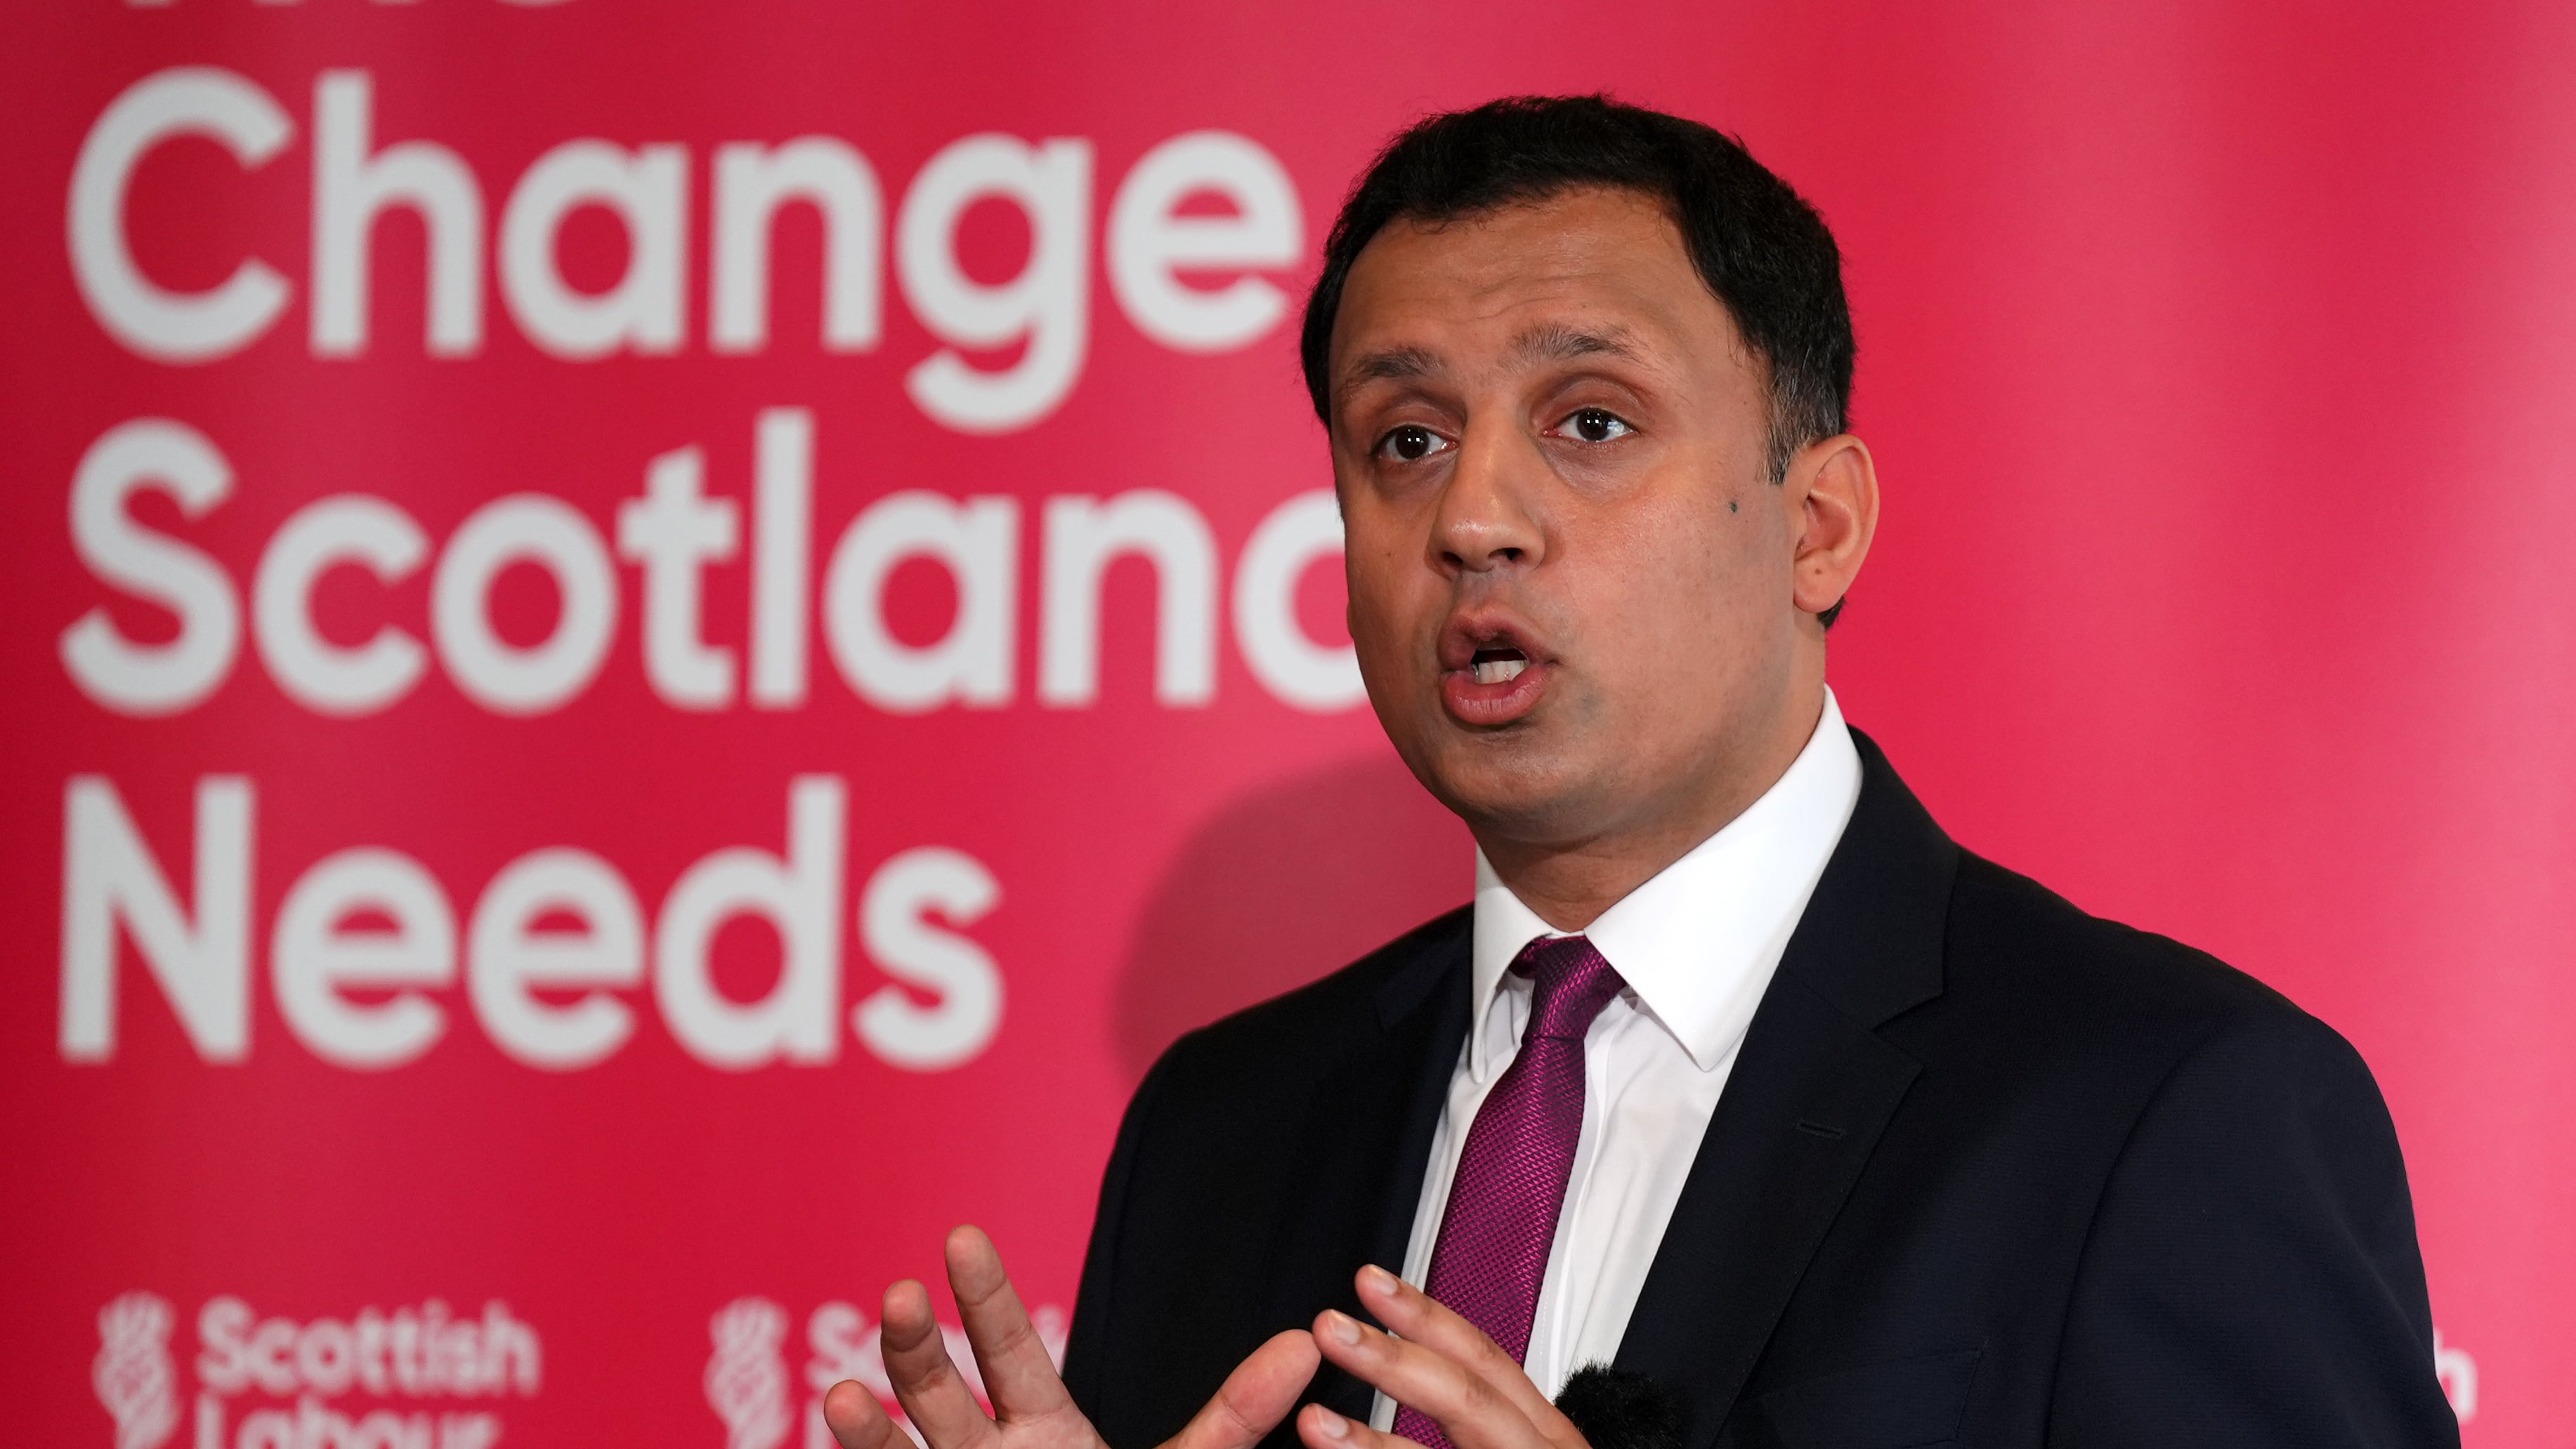 The Scottish Labour leader spoke as he entered the Glasgow count on Friday morning